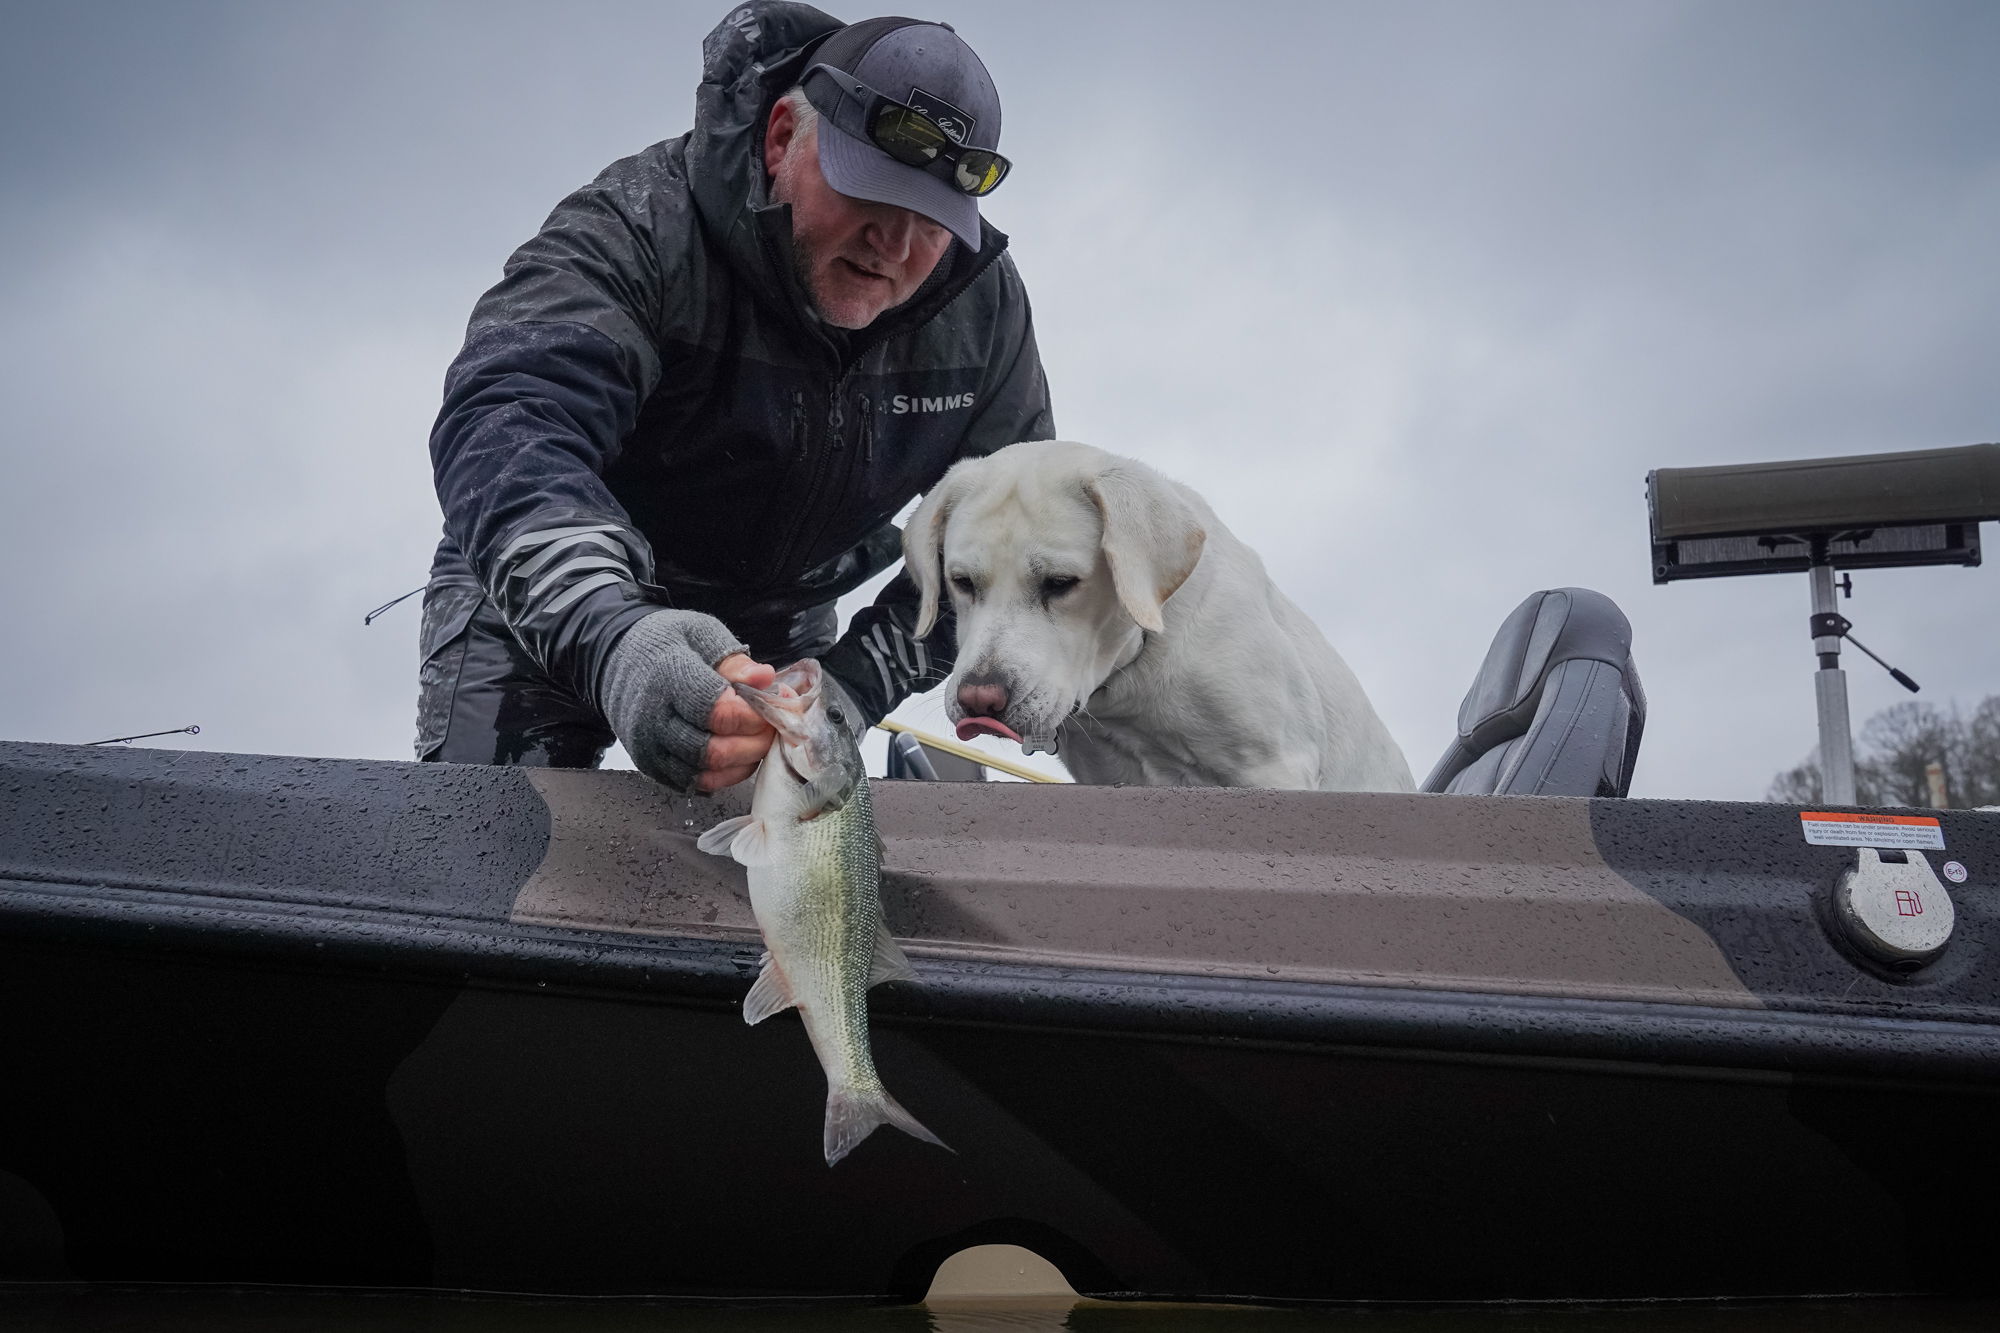 GALLERY: Aiming to be top dog on West Point - Major League Fishing